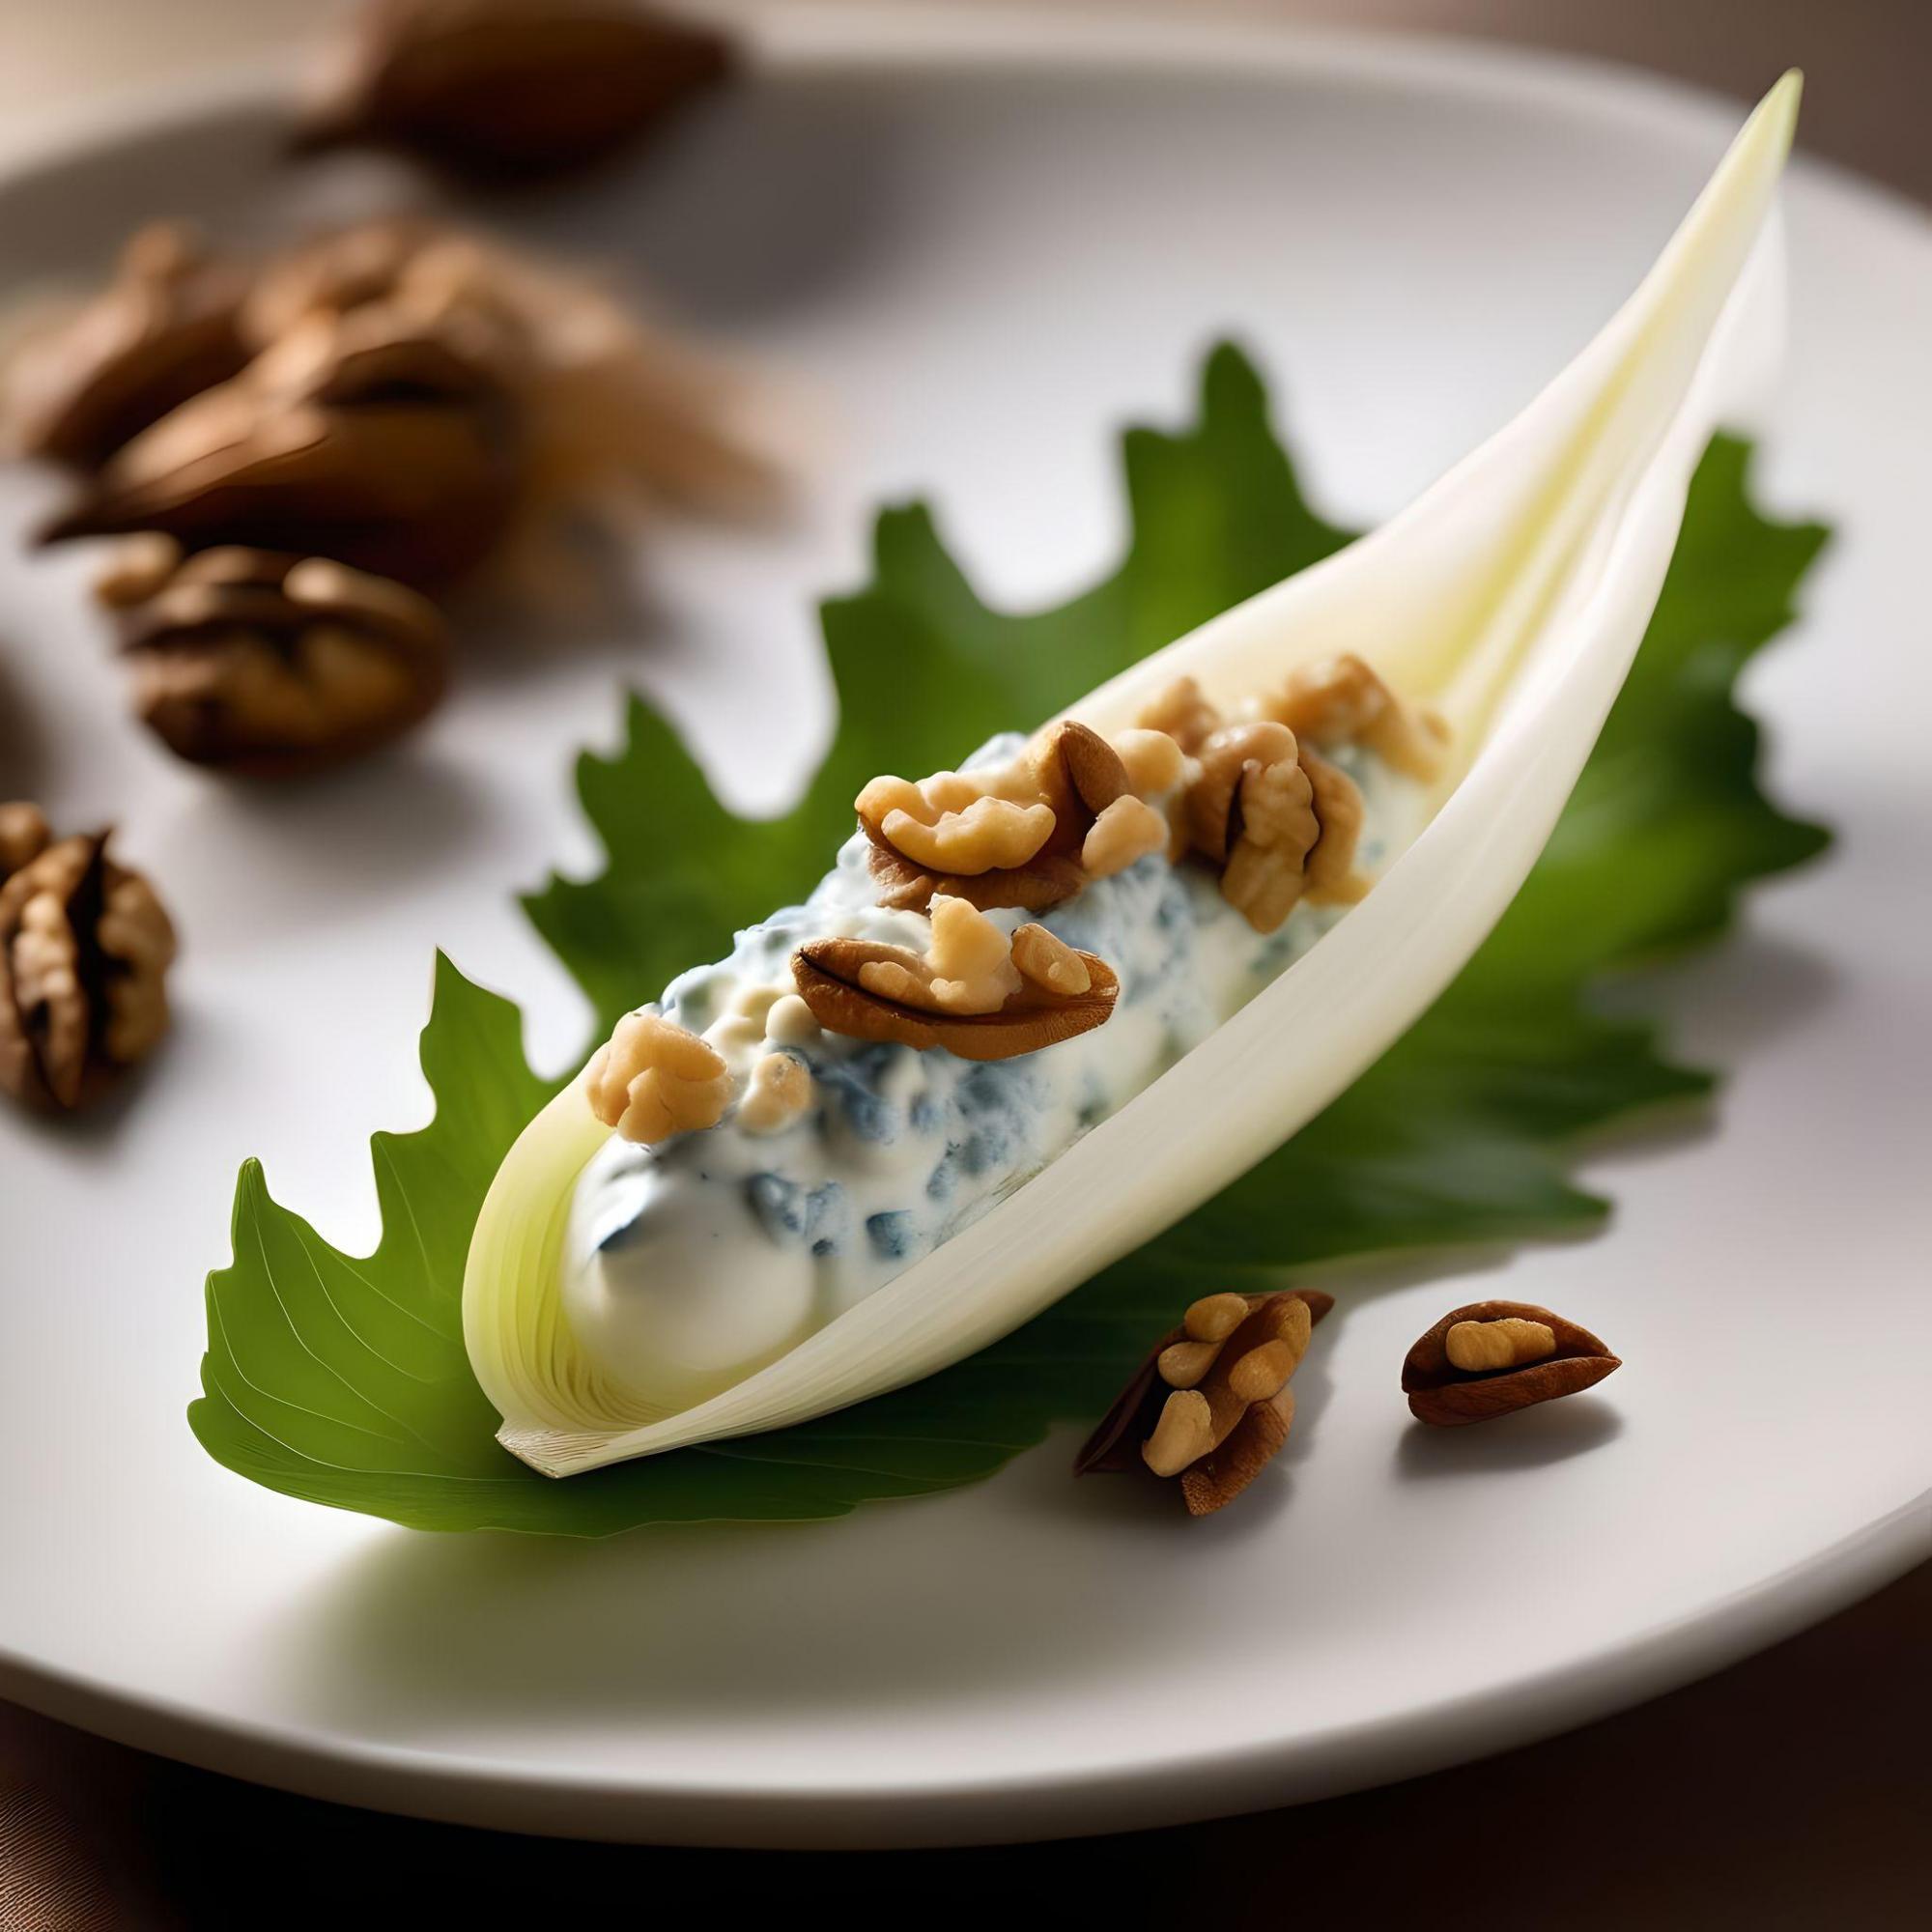 Endives with Roquefort cheese and walnuts